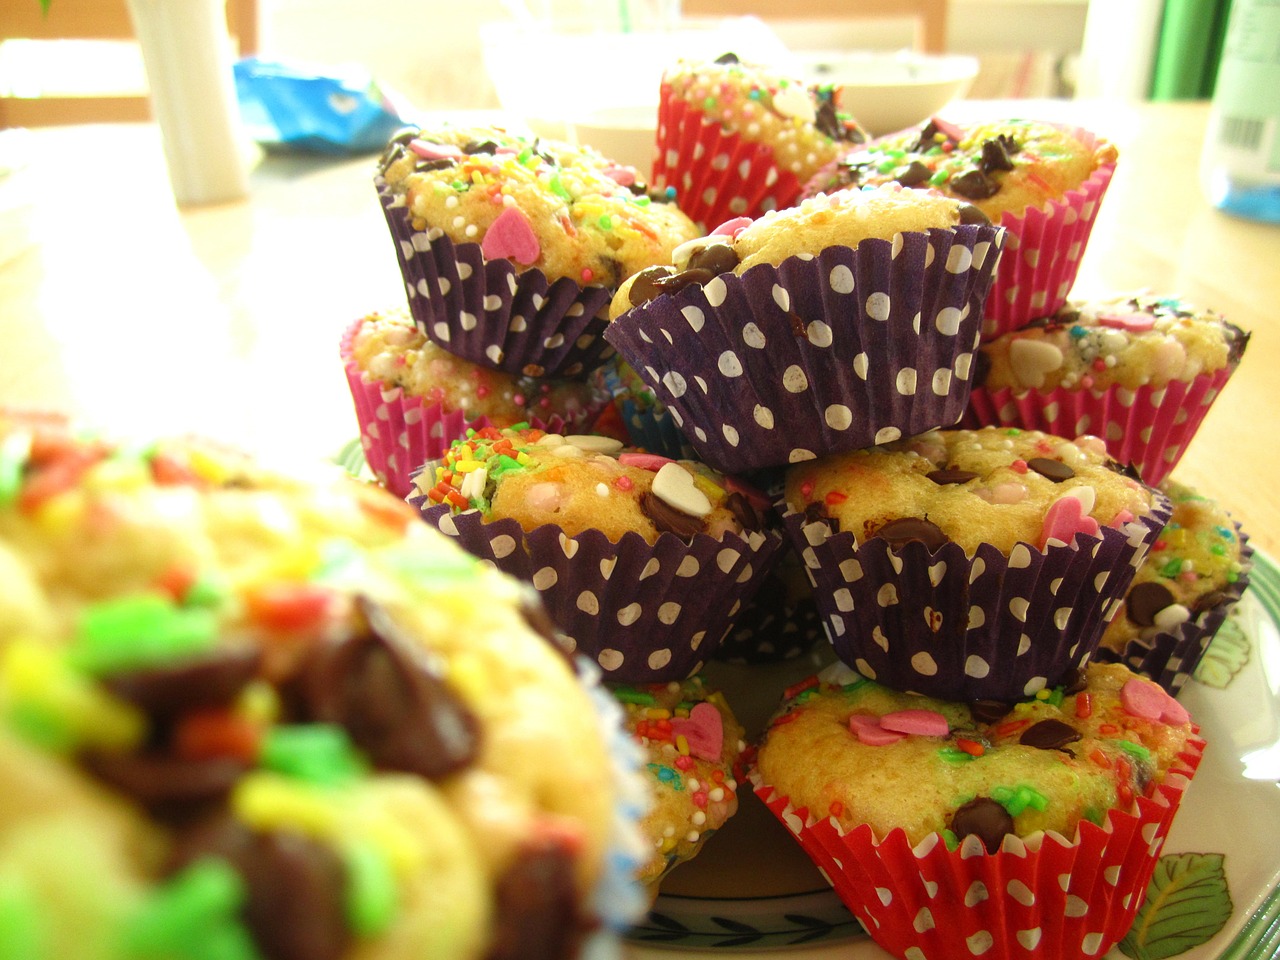 muffins colorful baked free photo